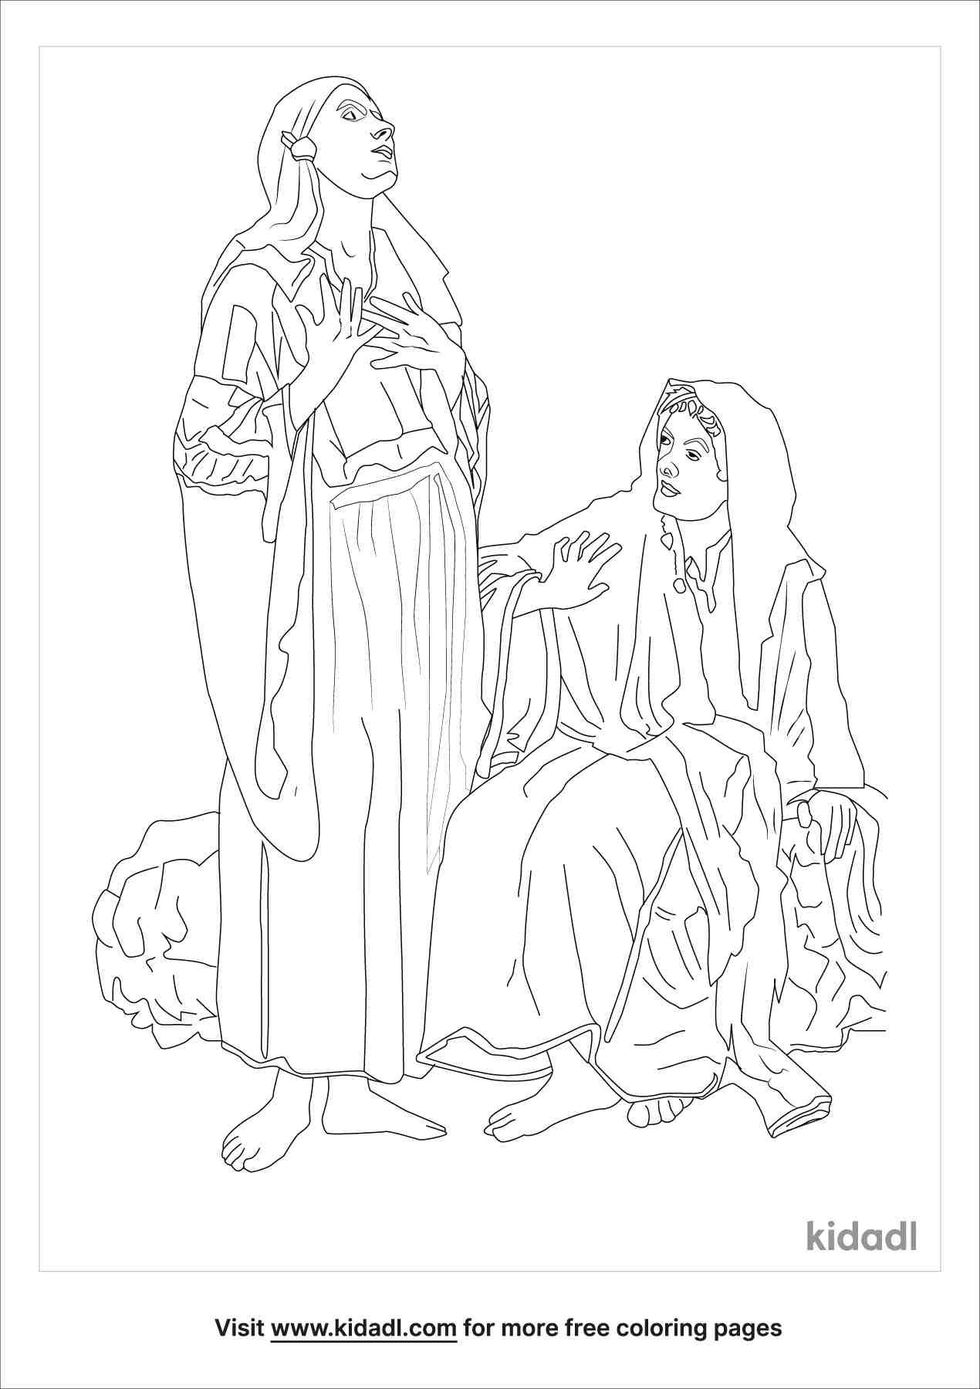 Mary Elizabeth Advent coloring pages for kids.